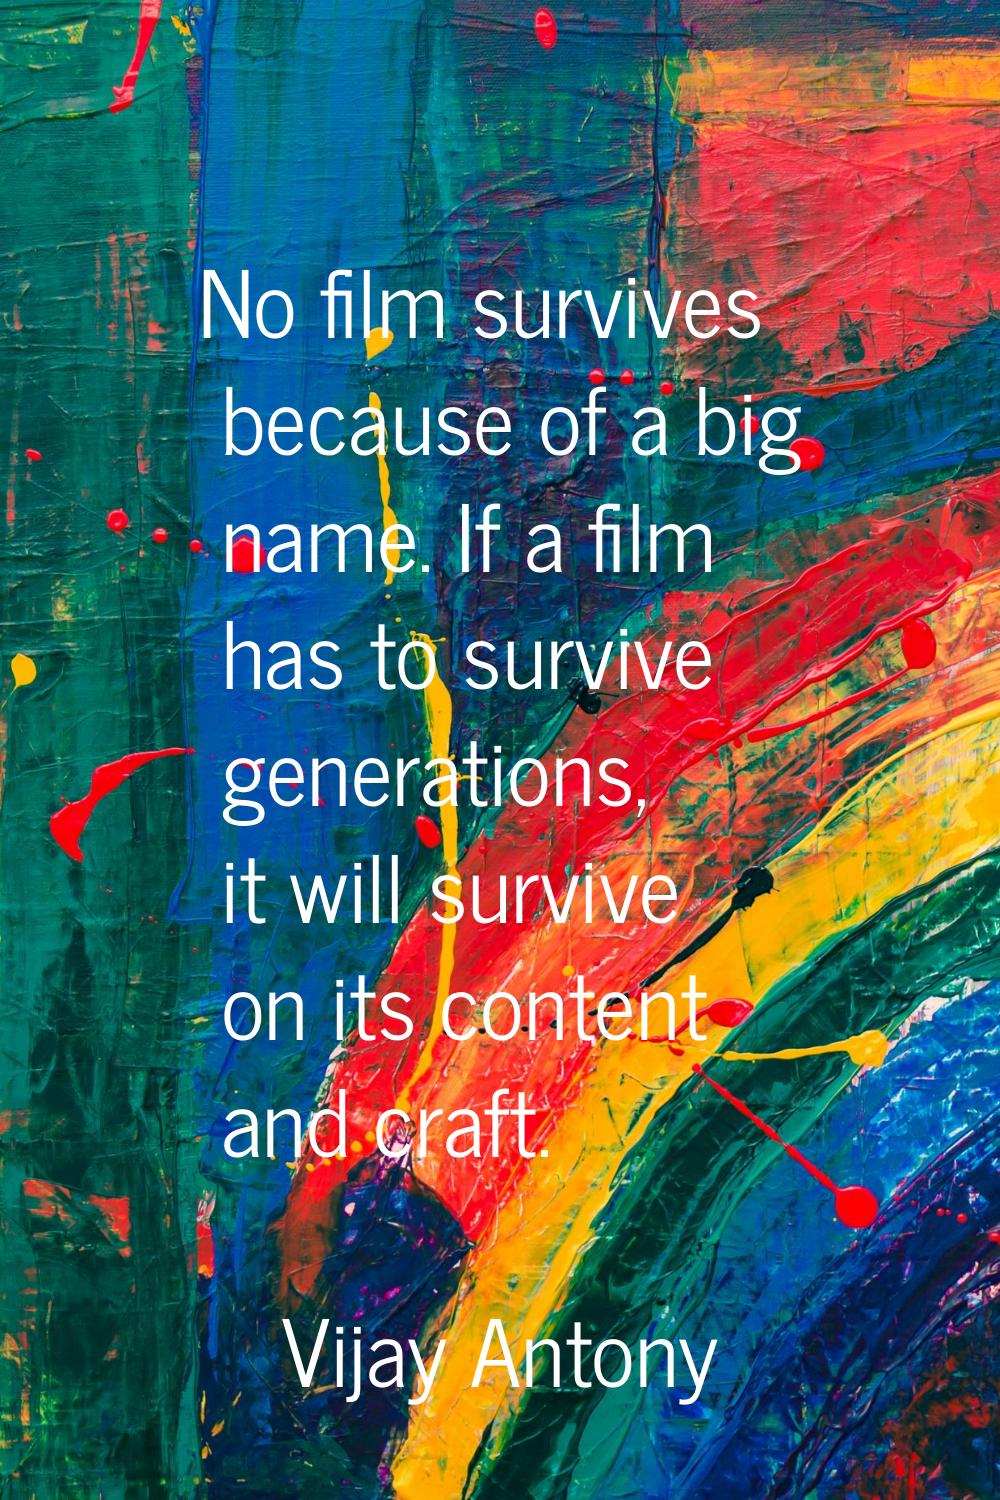 No film survives because of a big name. If a film has to survive generations, it will survive on it